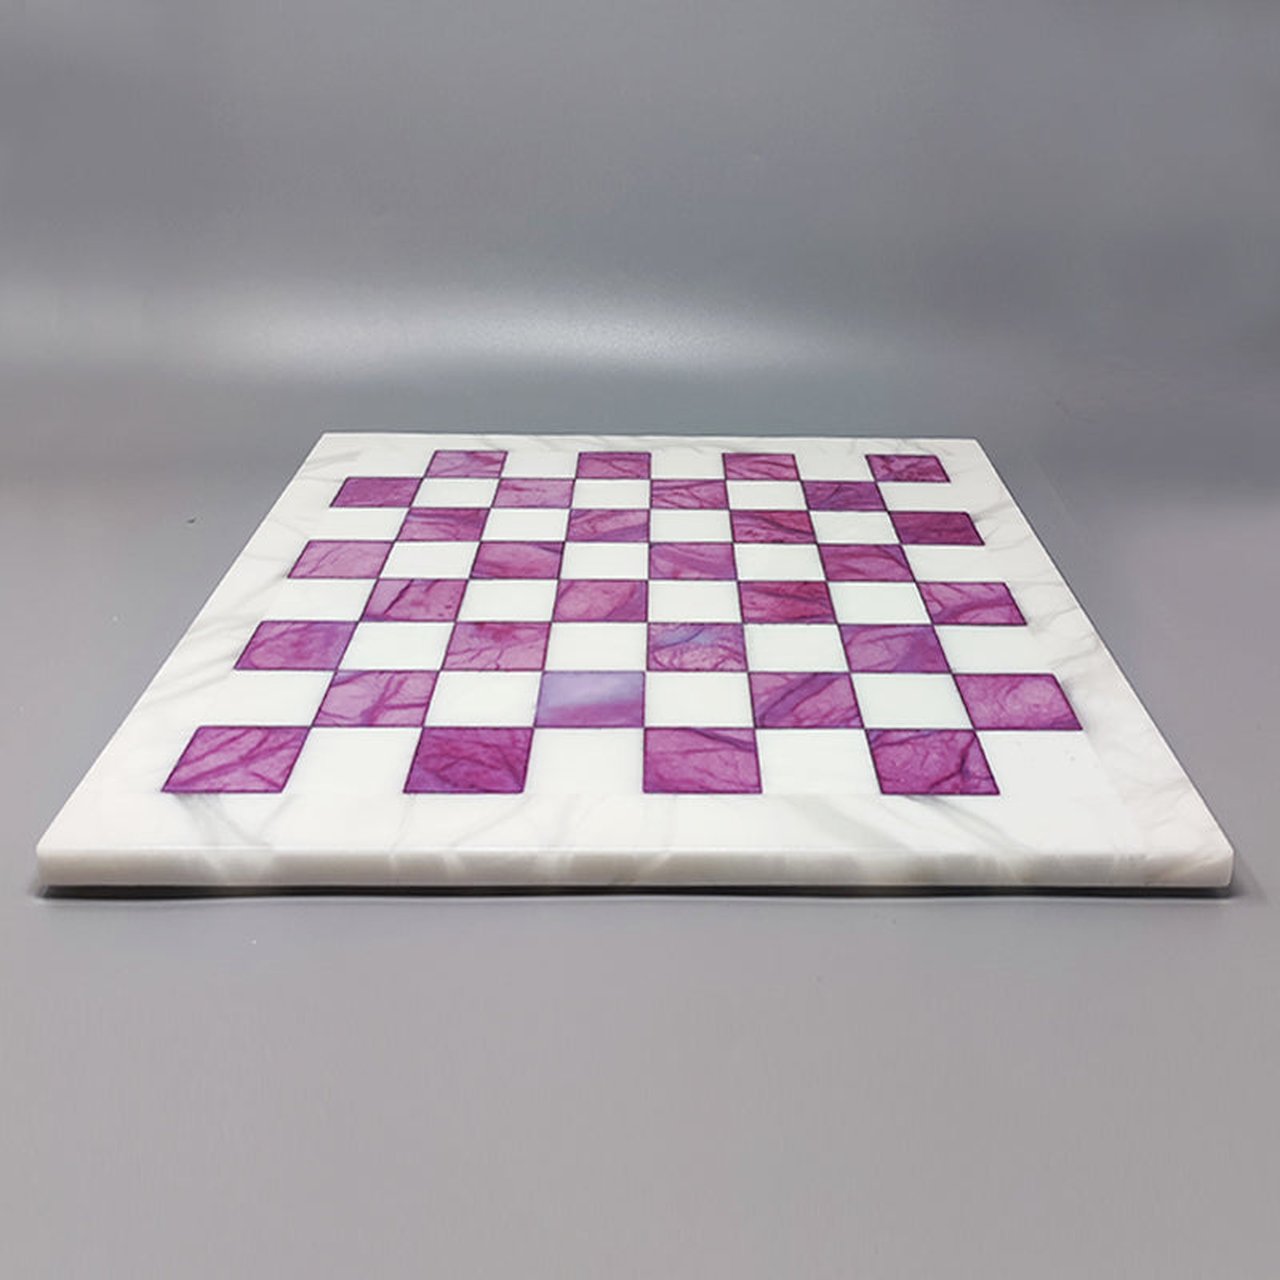 Alabaster Pink and White Chess image 6